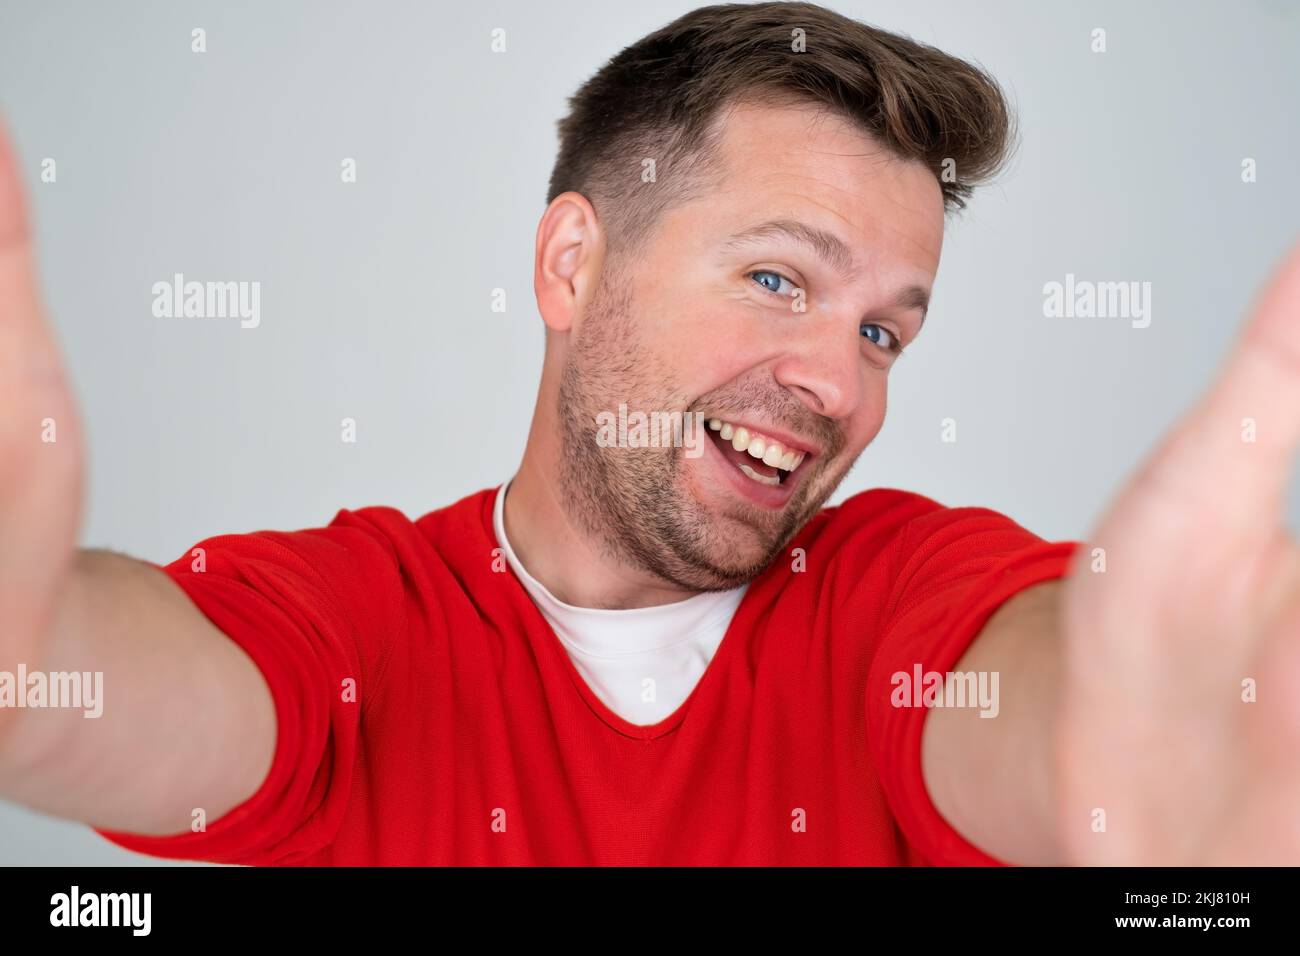 Handsome young man makes self, smiling broadly, on a gray background Stock Photo